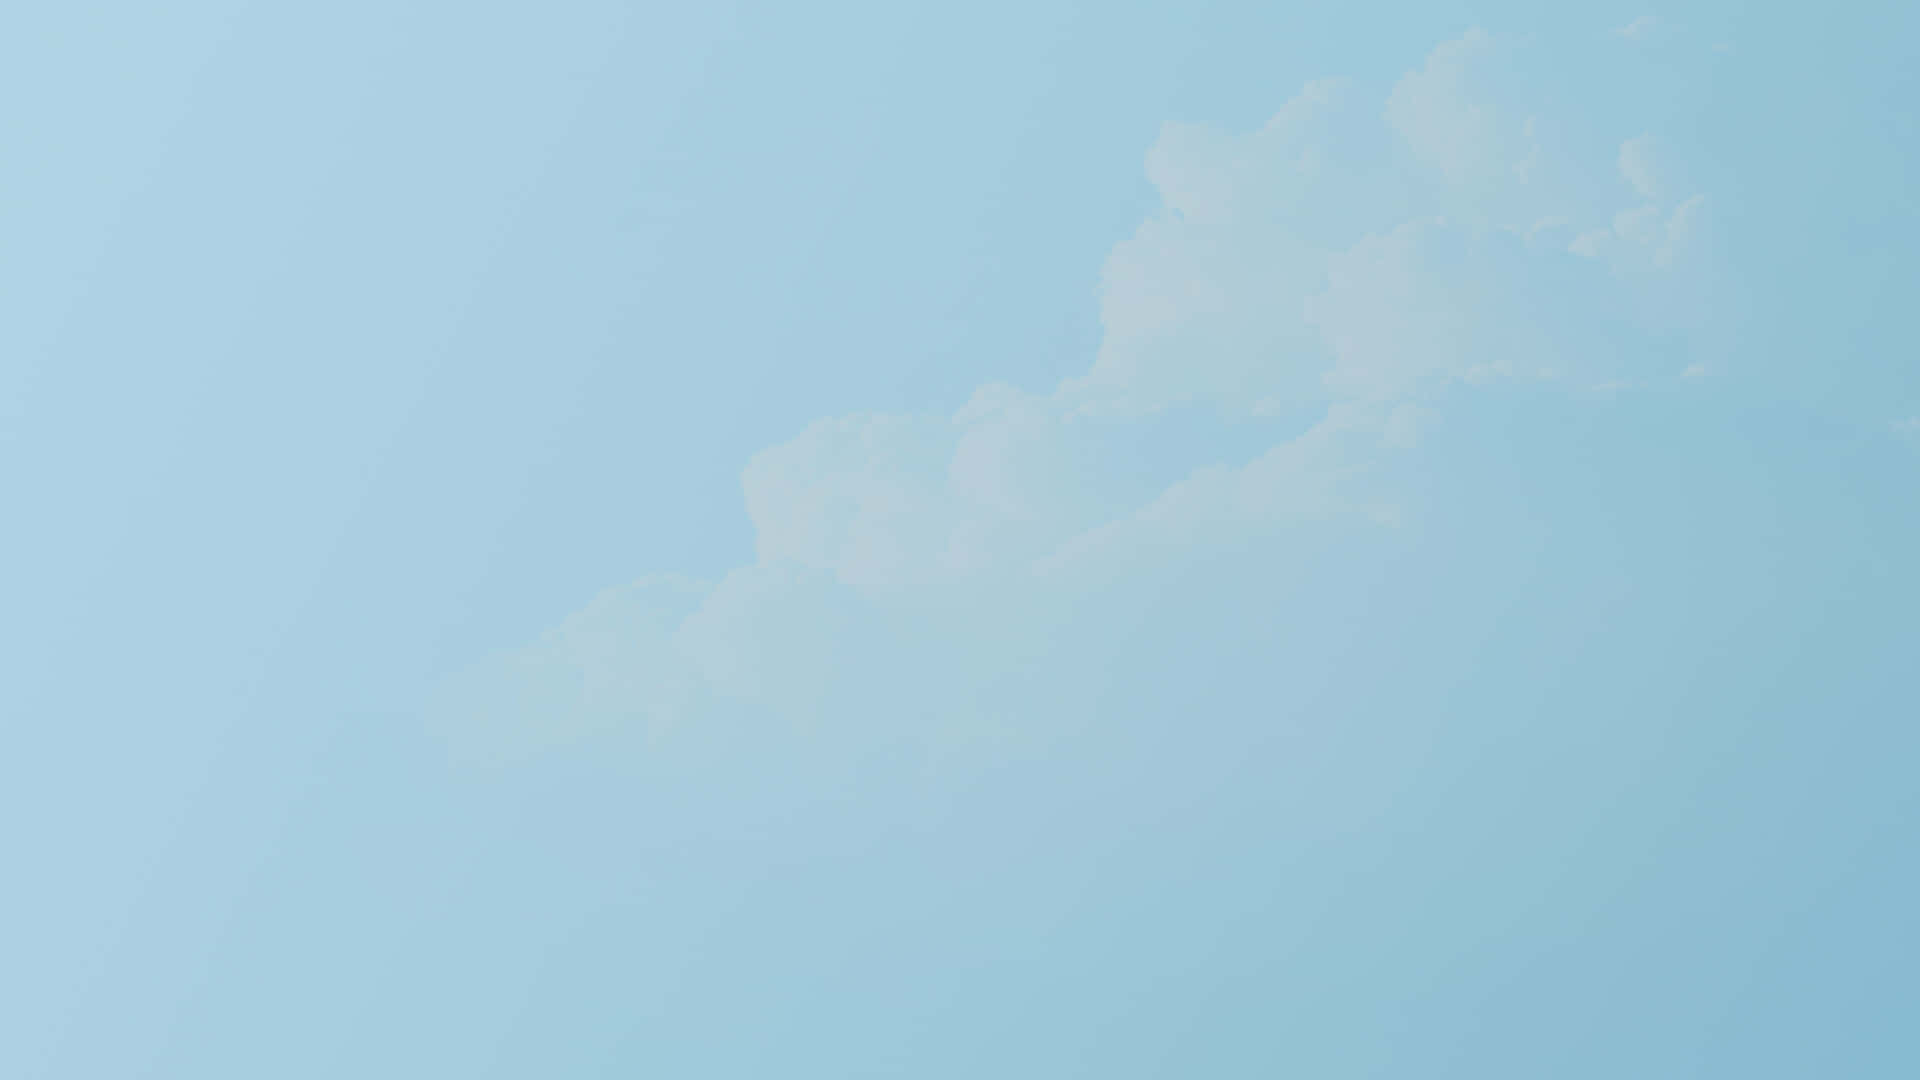 A background of serene, soft baby blue